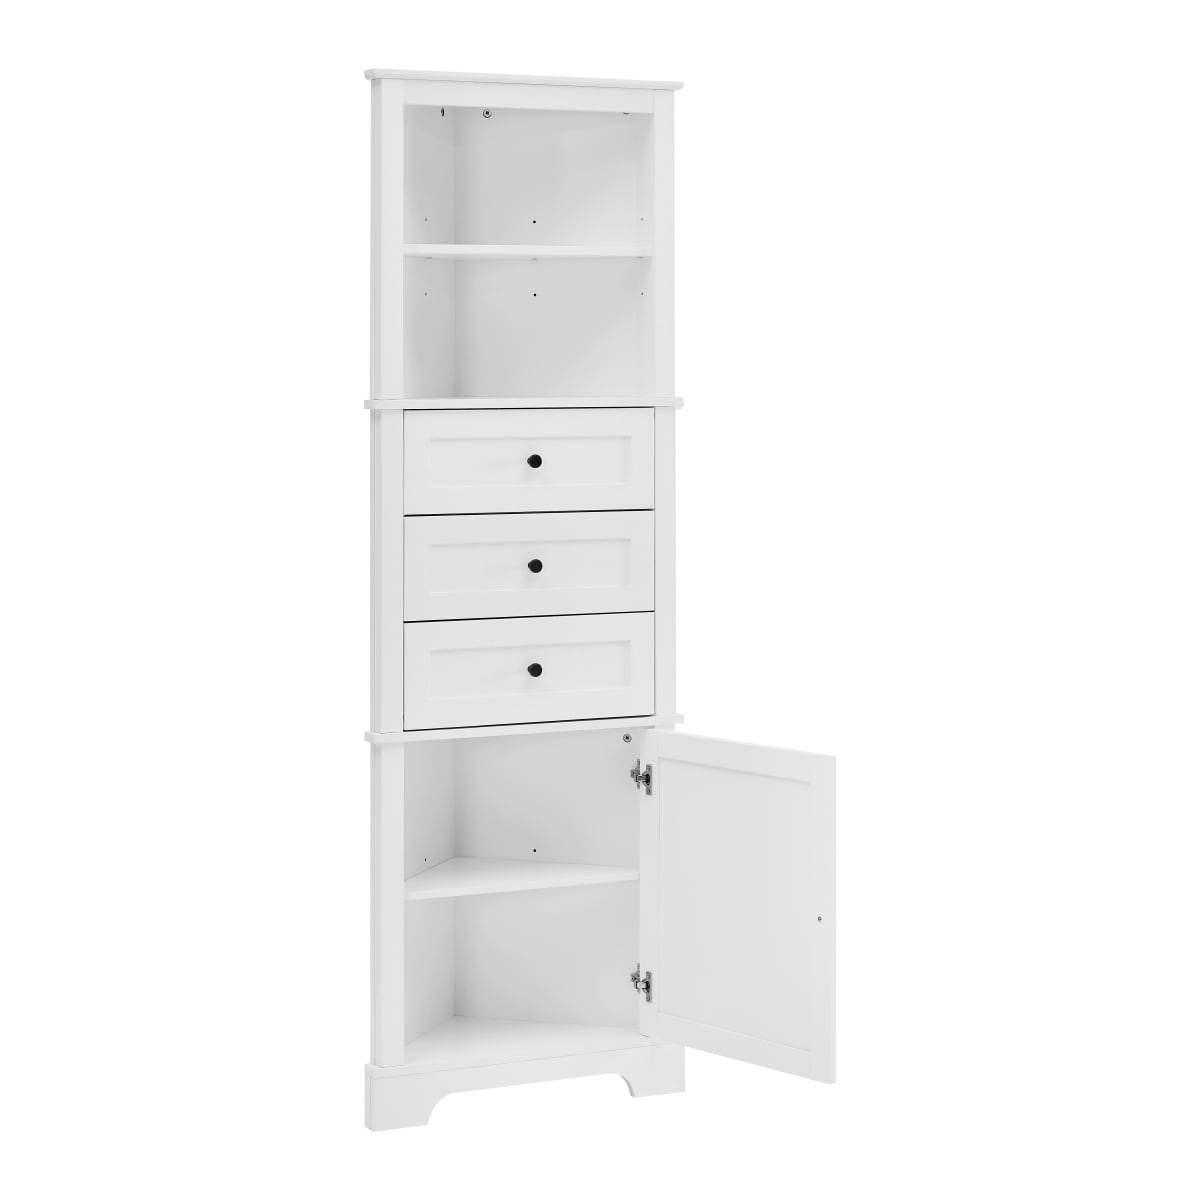 https://ak1.ostkcdn.com/images/products/is/images/direct/52ccf8e35ab26f1a1a2413d739c25948c7fe054c/Triangle-Corner-Cabinet-with-3-Drawers-and-Adjustable-Shelves%2C-Modern-Bathroom-Cabinet%2C-Floor-Cabinet.jpg